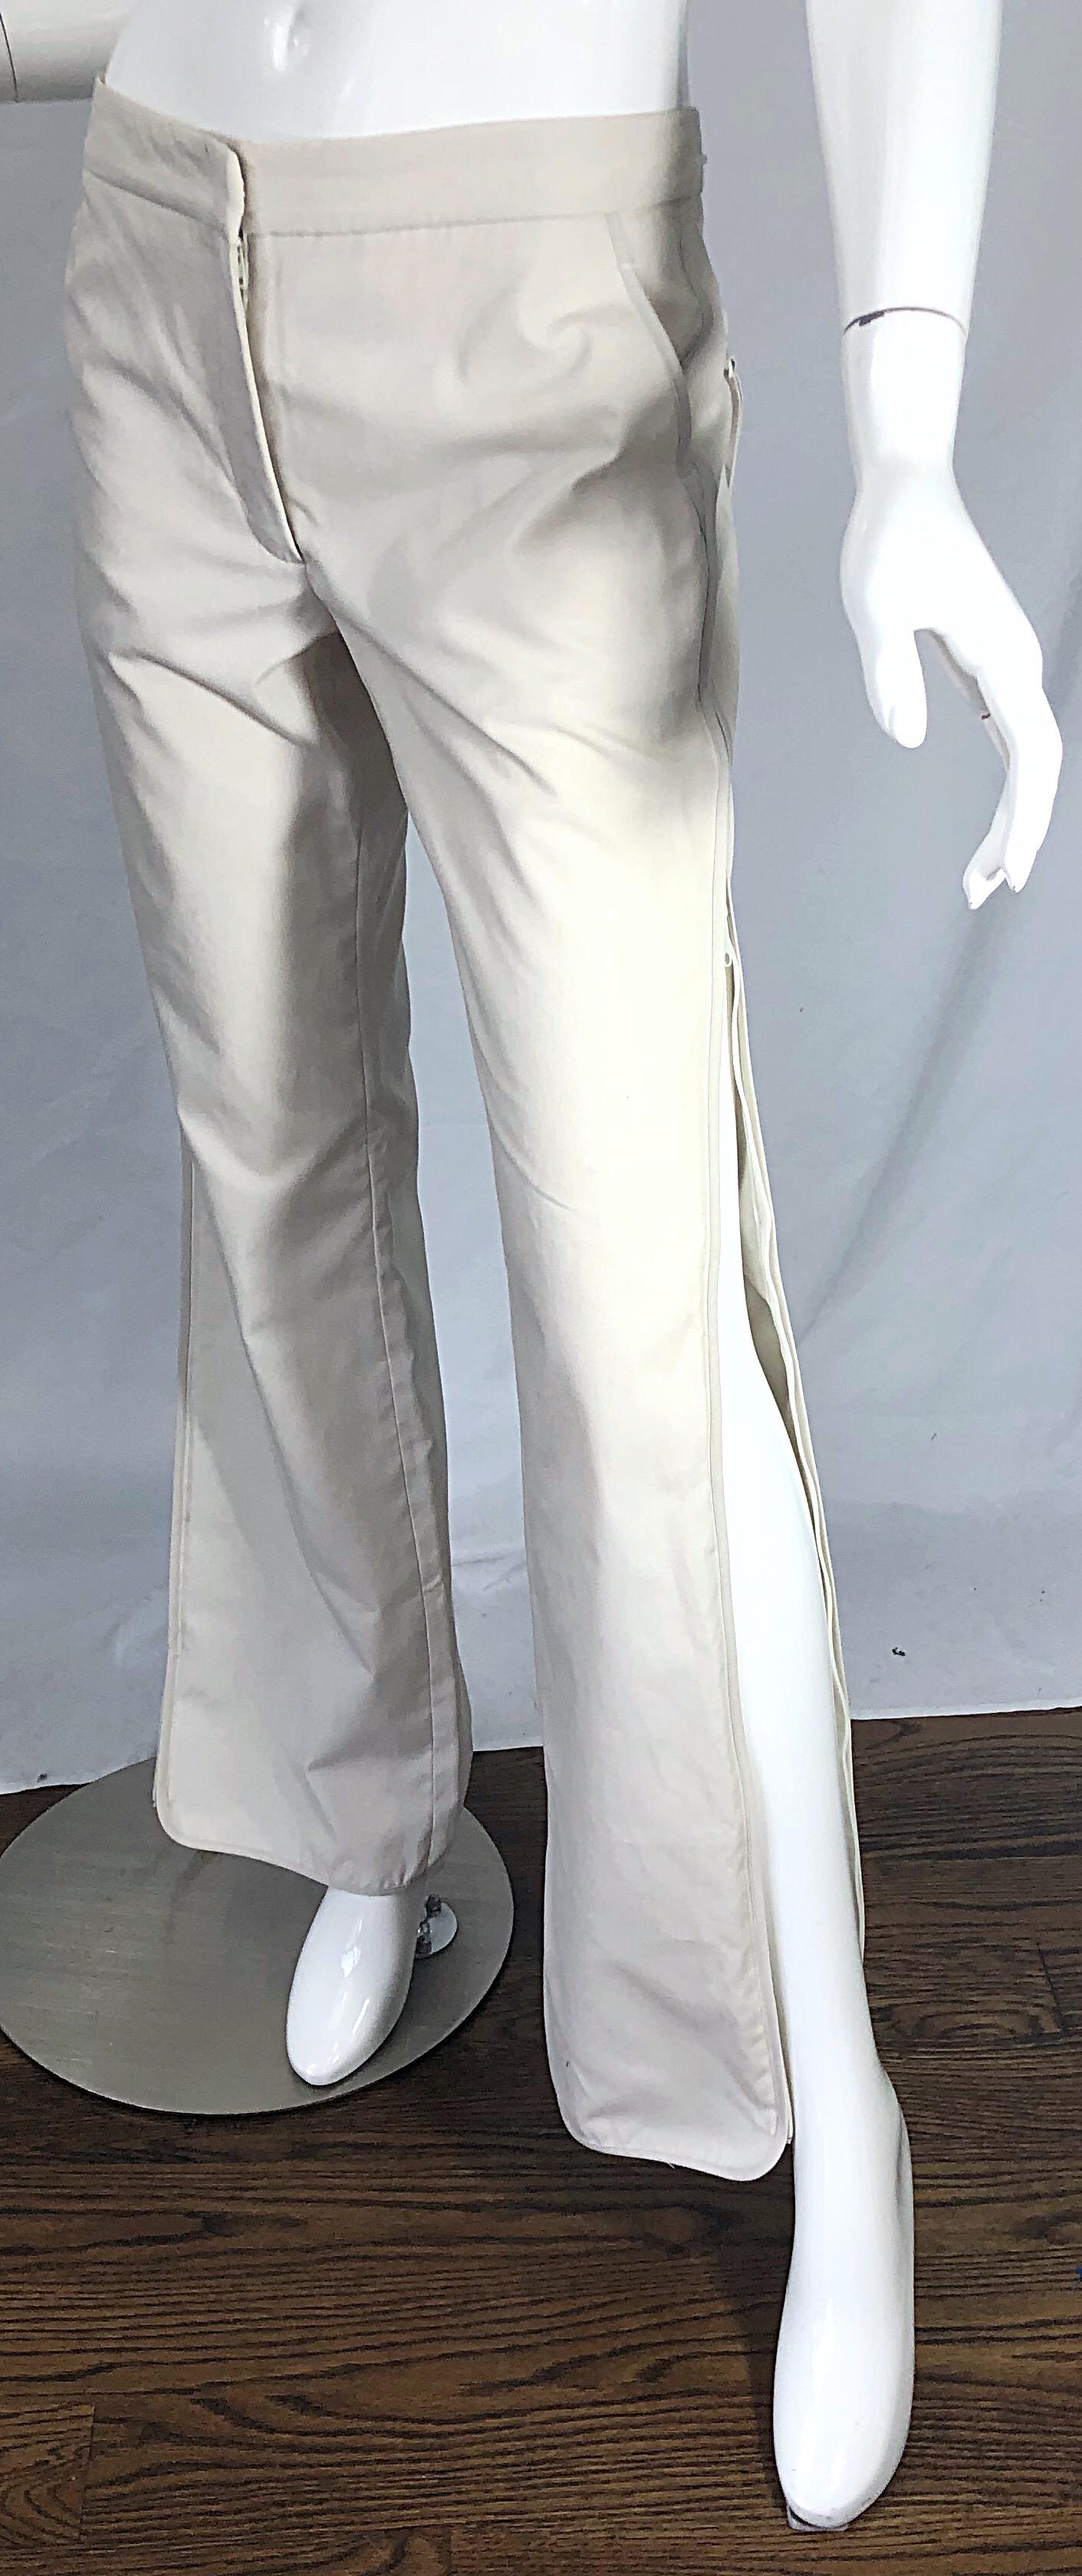 Late 90s KATAYONE ADELI low rise cotton trousers ! Slim fit with zippers up each outter leg all the way from the waistband to the hem. Hook-and-eye closure at waist with additional inner button closure. Pockets at each side of the waist and on the